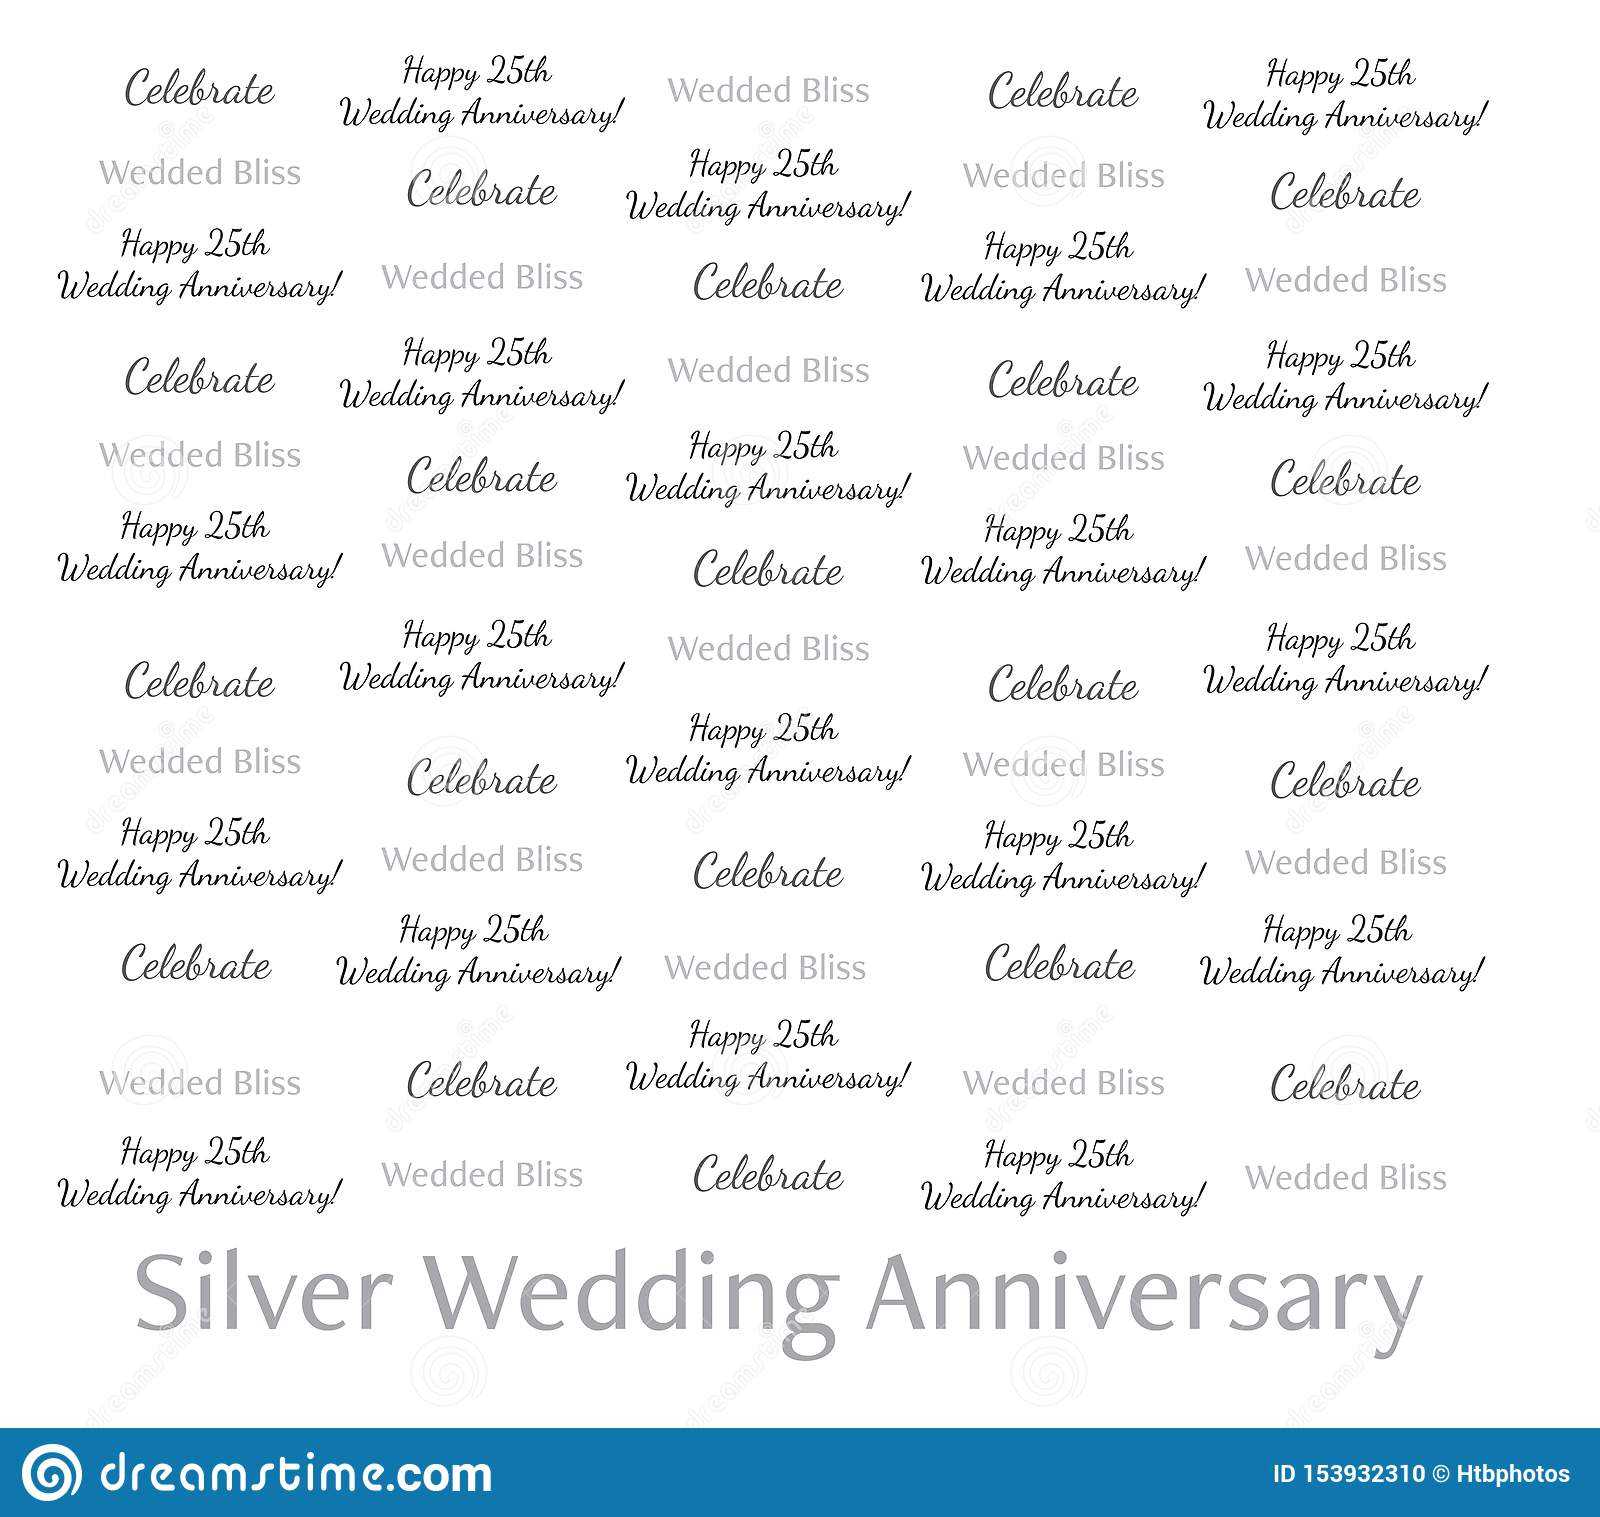 8X8 Step Repeat Banner – Silver Wedding Anniversary With Step And Repeat Banner Template